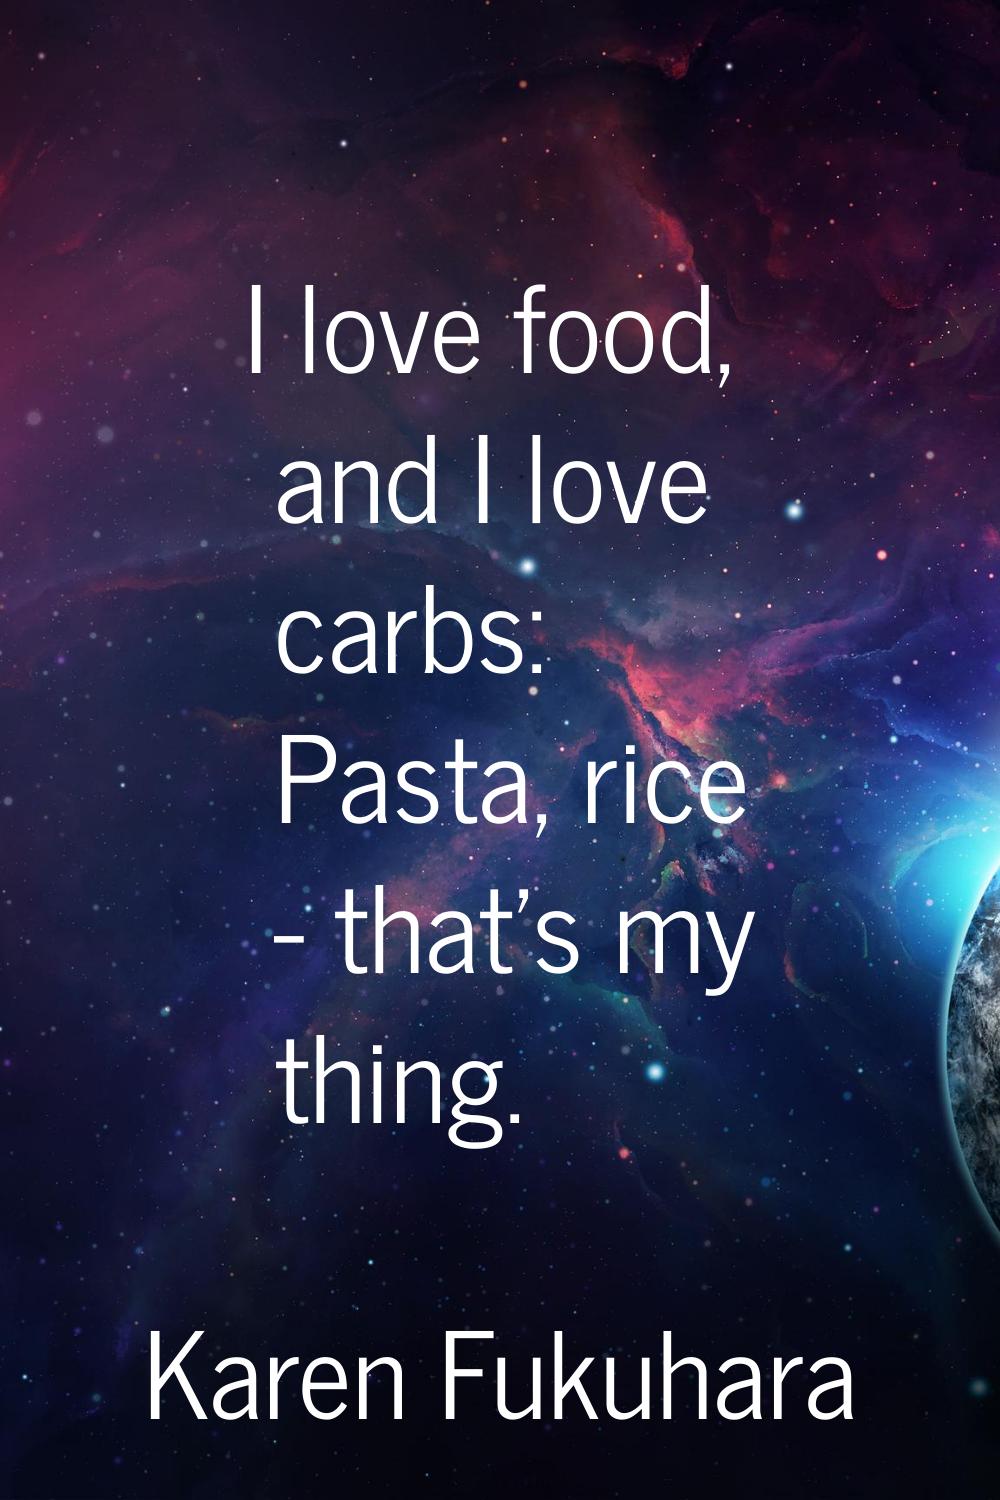 I love food, and I love carbs: Pasta, rice - that's my thing.